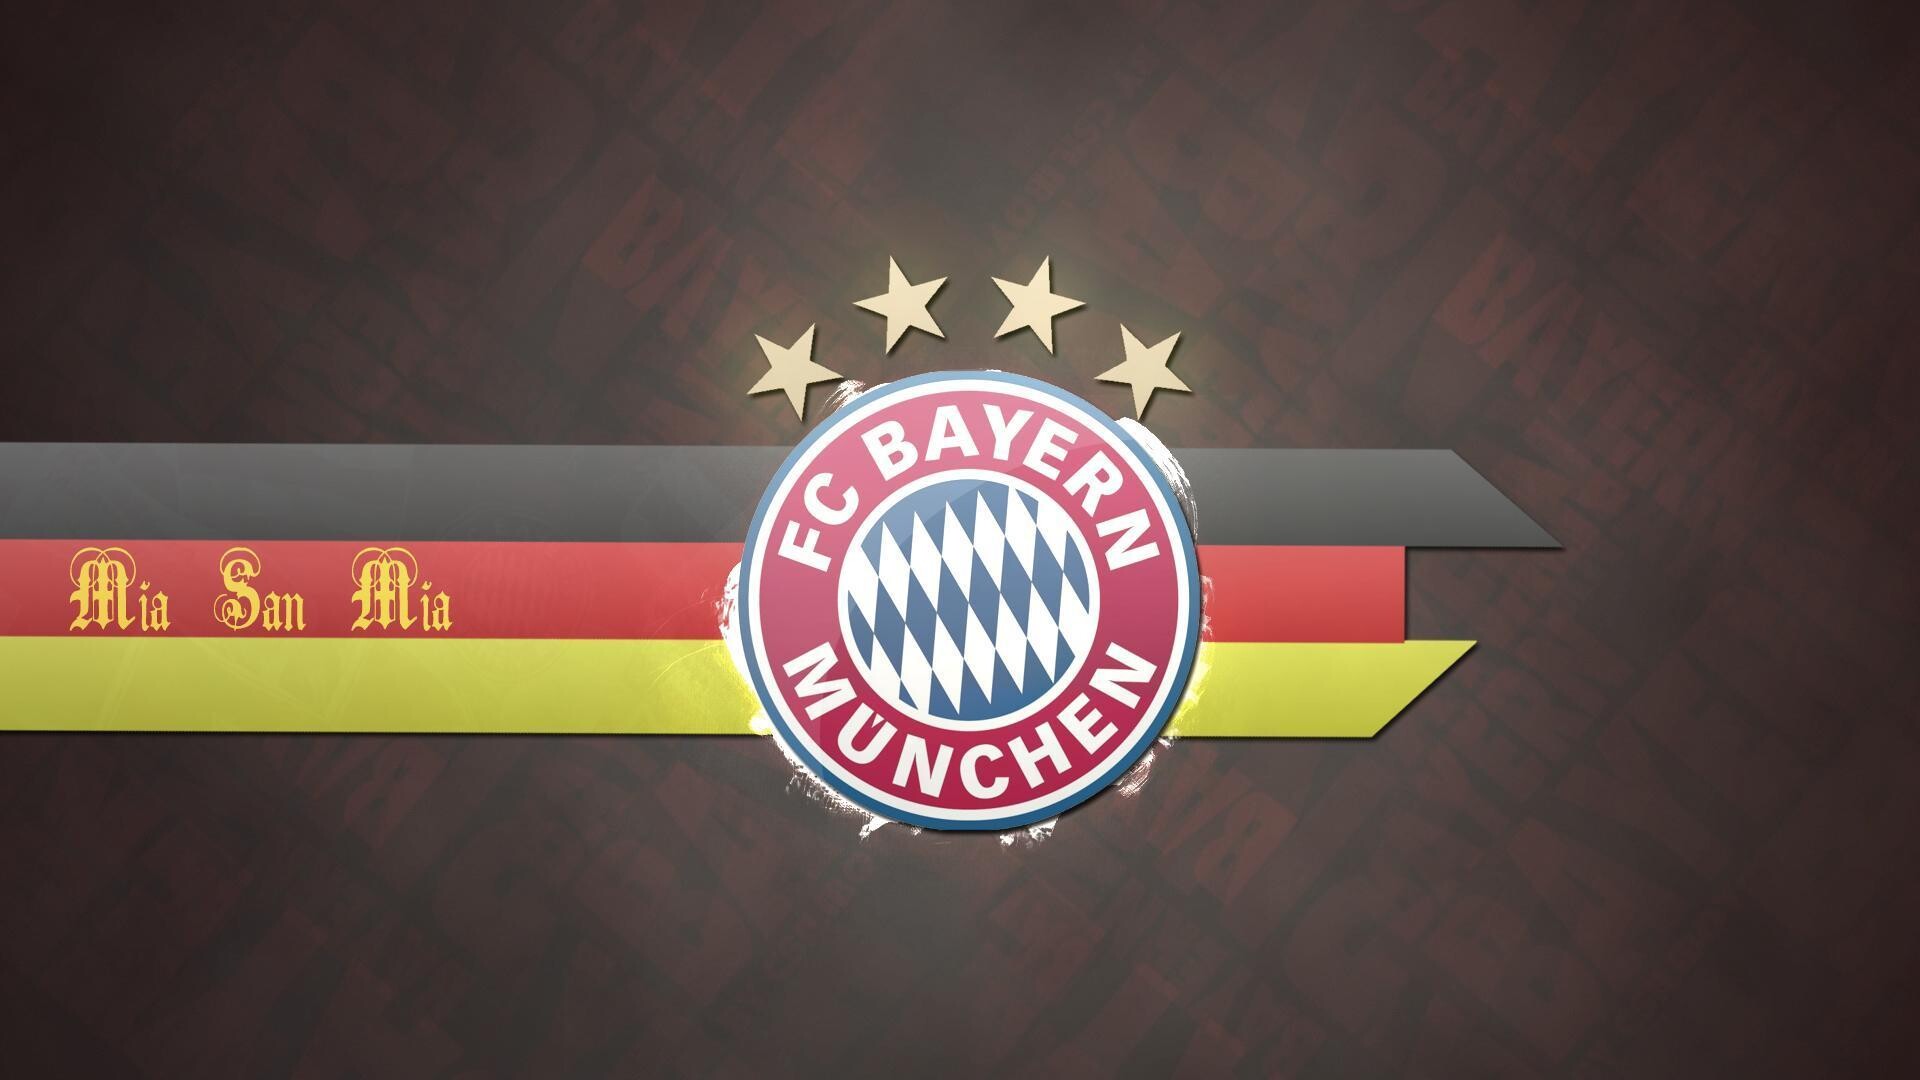 Germany Soccer Team: FC Bayern Munich, Star of the South, Six-time European Cup/UEFA Champions League winners. 1920x1080 Full HD Background.